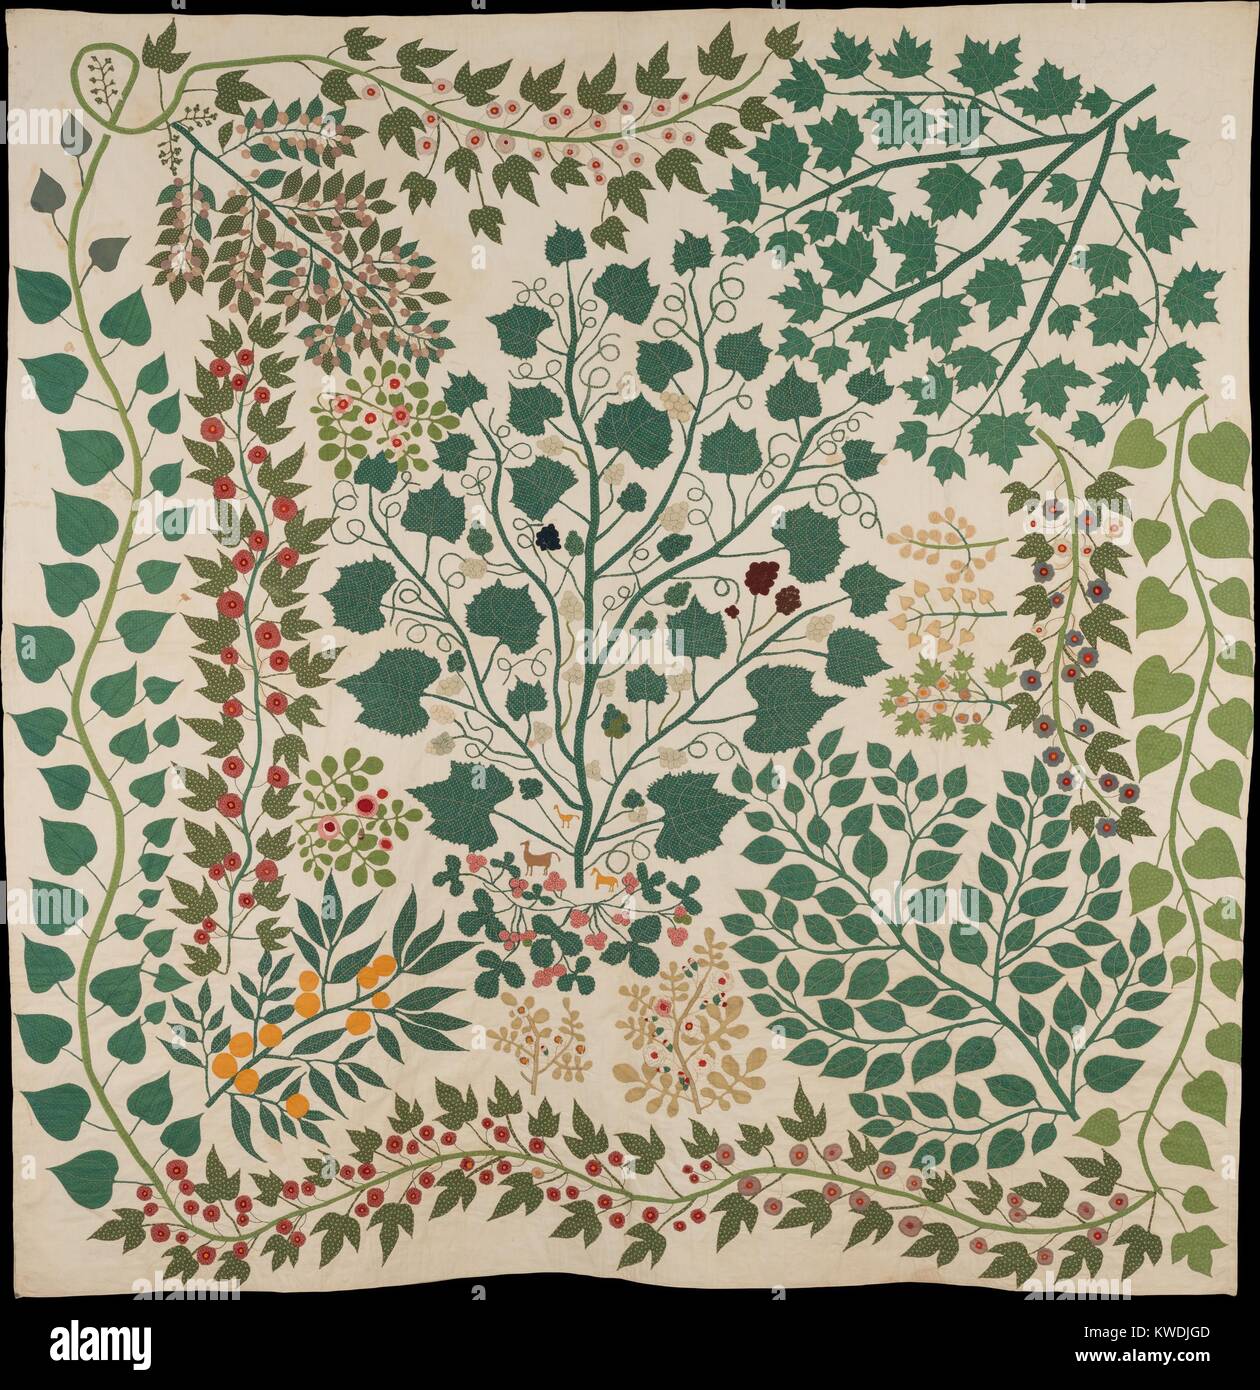 BRANCHES AND VINES QUILT, by Ernestine Eberhardt Zaumsei. 1875, American crafts, textiles. Tree of Life pattern was a popular design for use on American bedcovers since the seventeenth century. The appliquéd leaves were traced leaves from actual trees and vines (BSLOC 2017 16 124) Stock Photo